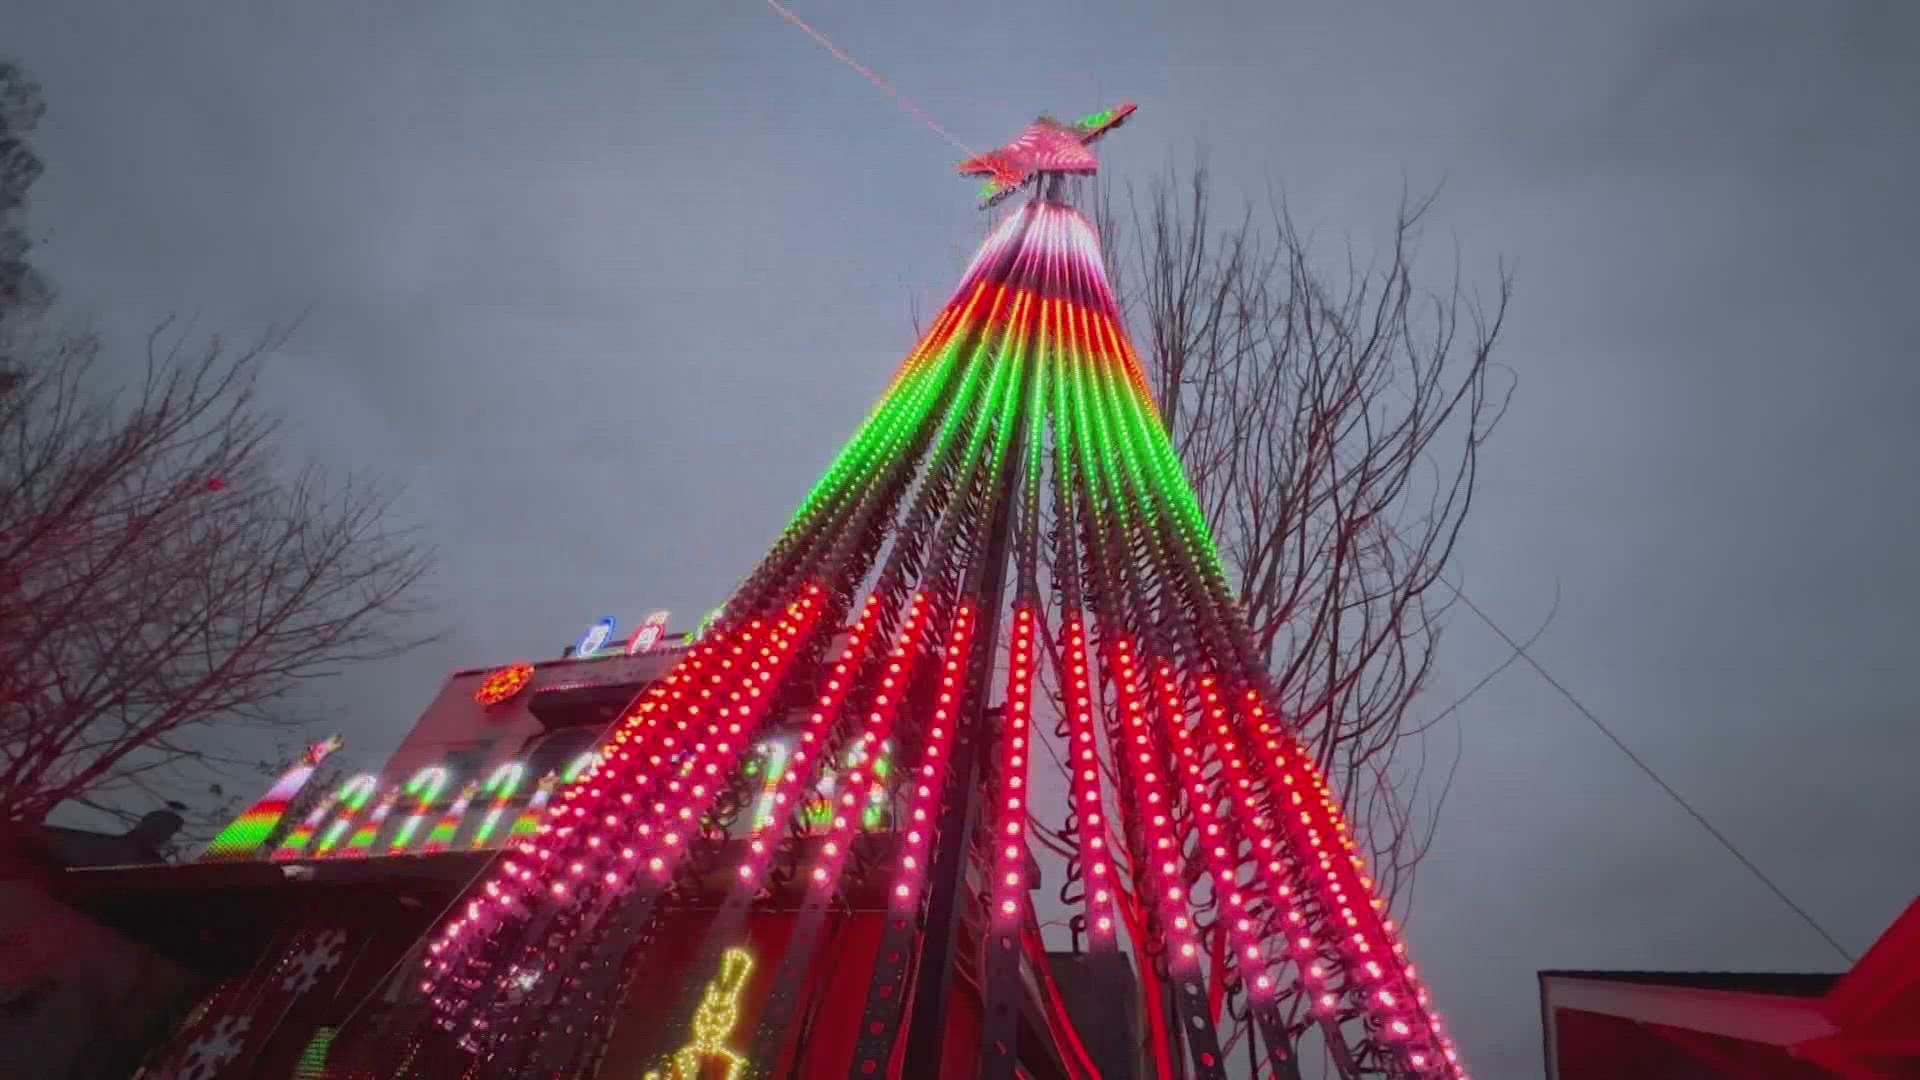 A couple from West Seattle has spent the last year programming a custom holiday light show that they hope will spread some cheer.